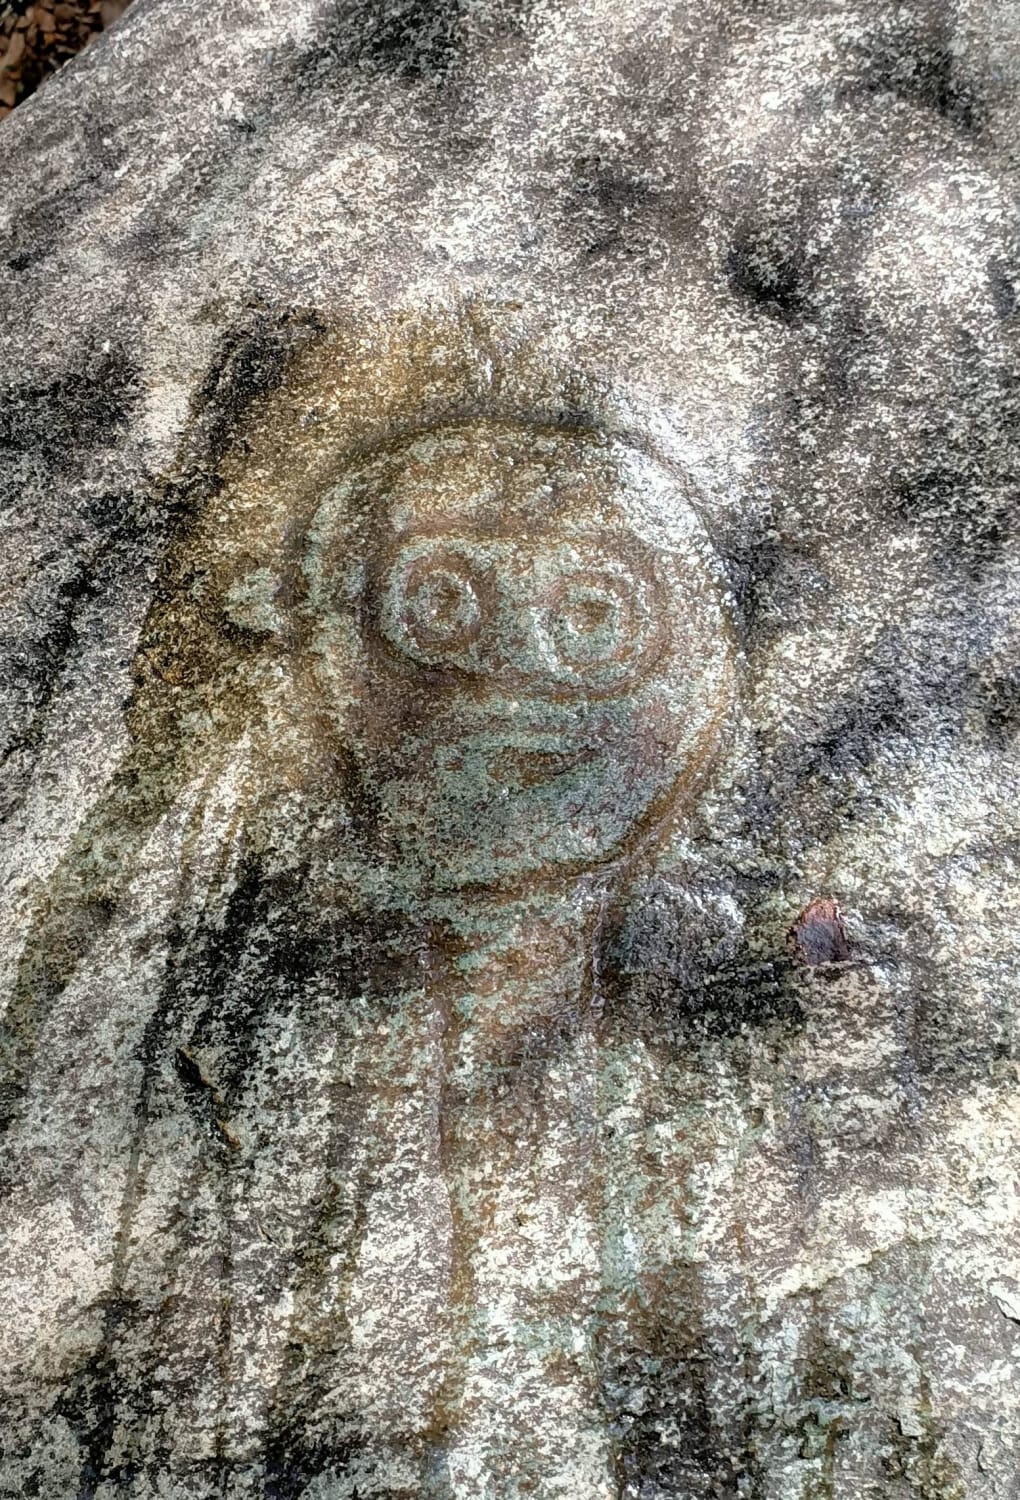 Went to see petroglyphs and found the spy